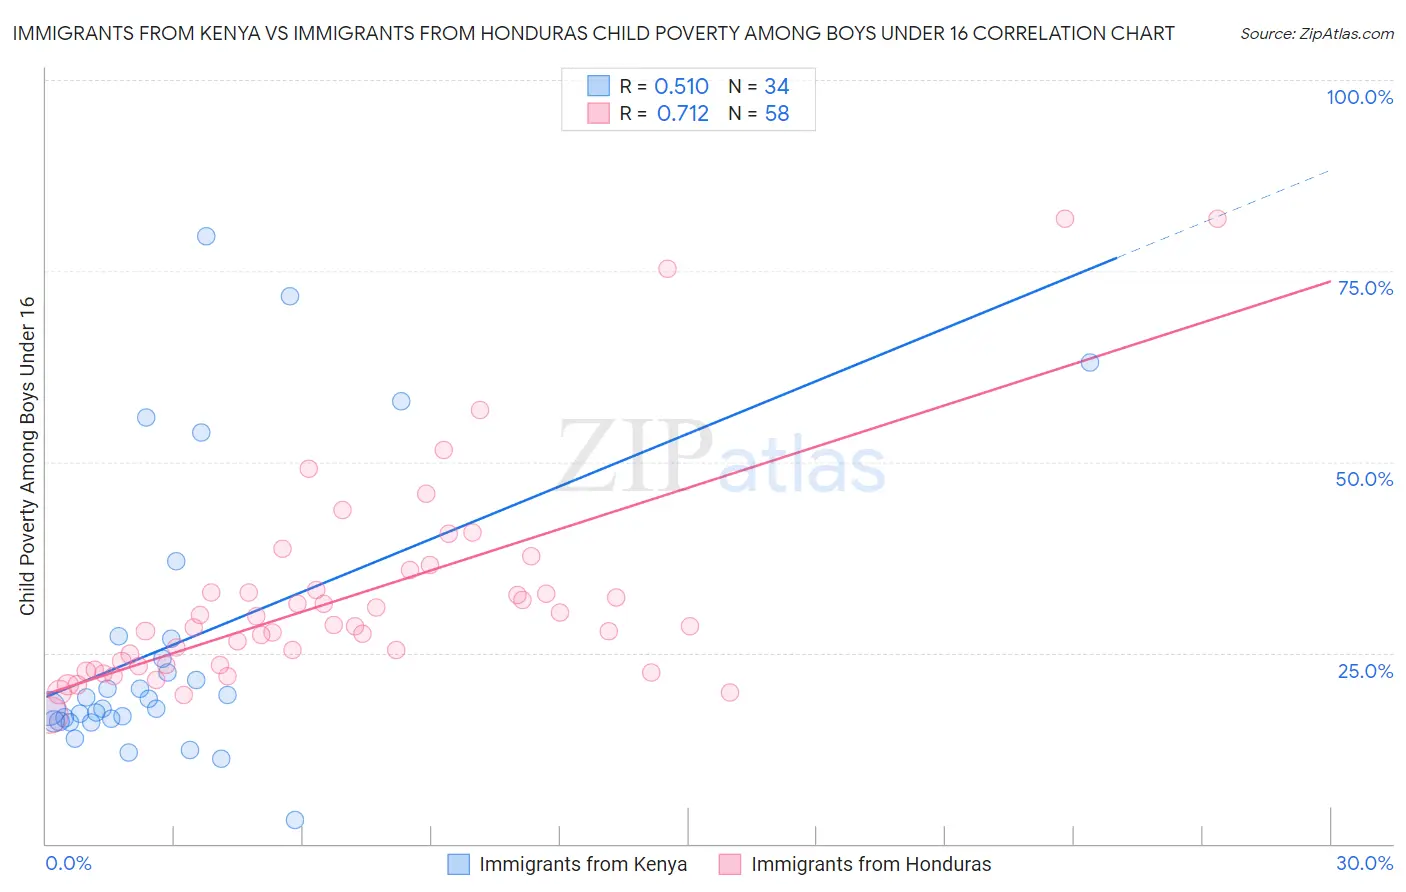 Immigrants from Kenya vs Immigrants from Honduras Child Poverty Among Boys Under 16